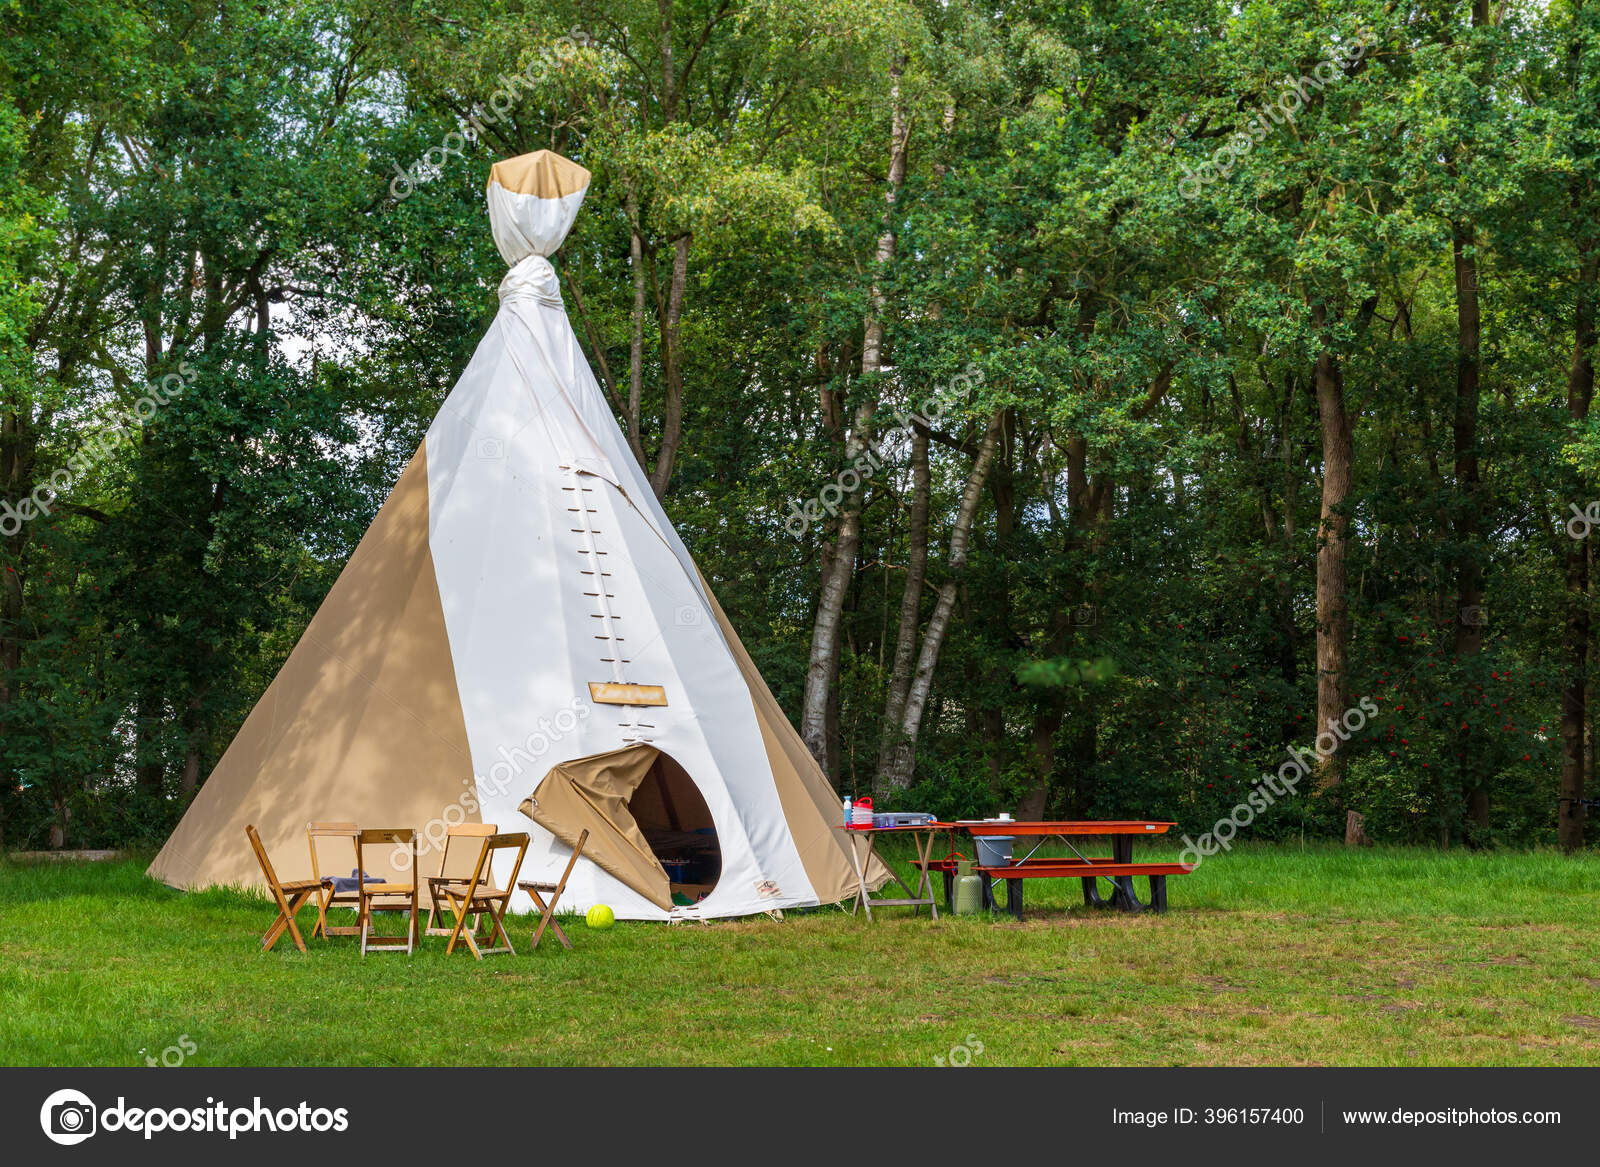 Colorful with wigwam tents Stock Photo ©photoweges 396157400